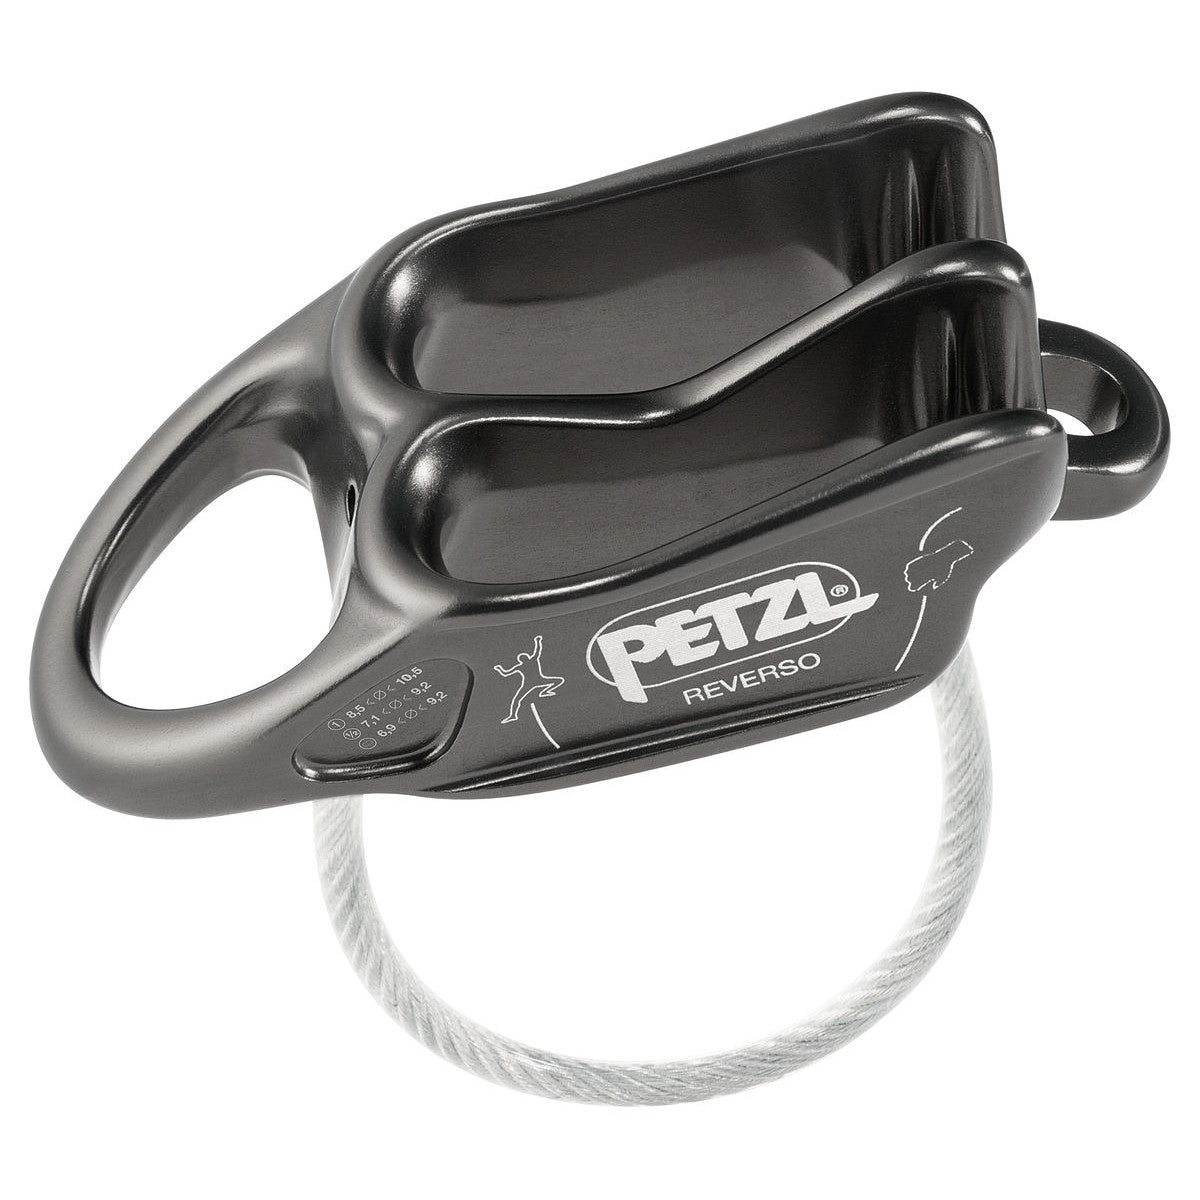 Petzl Reverso belay device, side view shown in grey colour in Grey